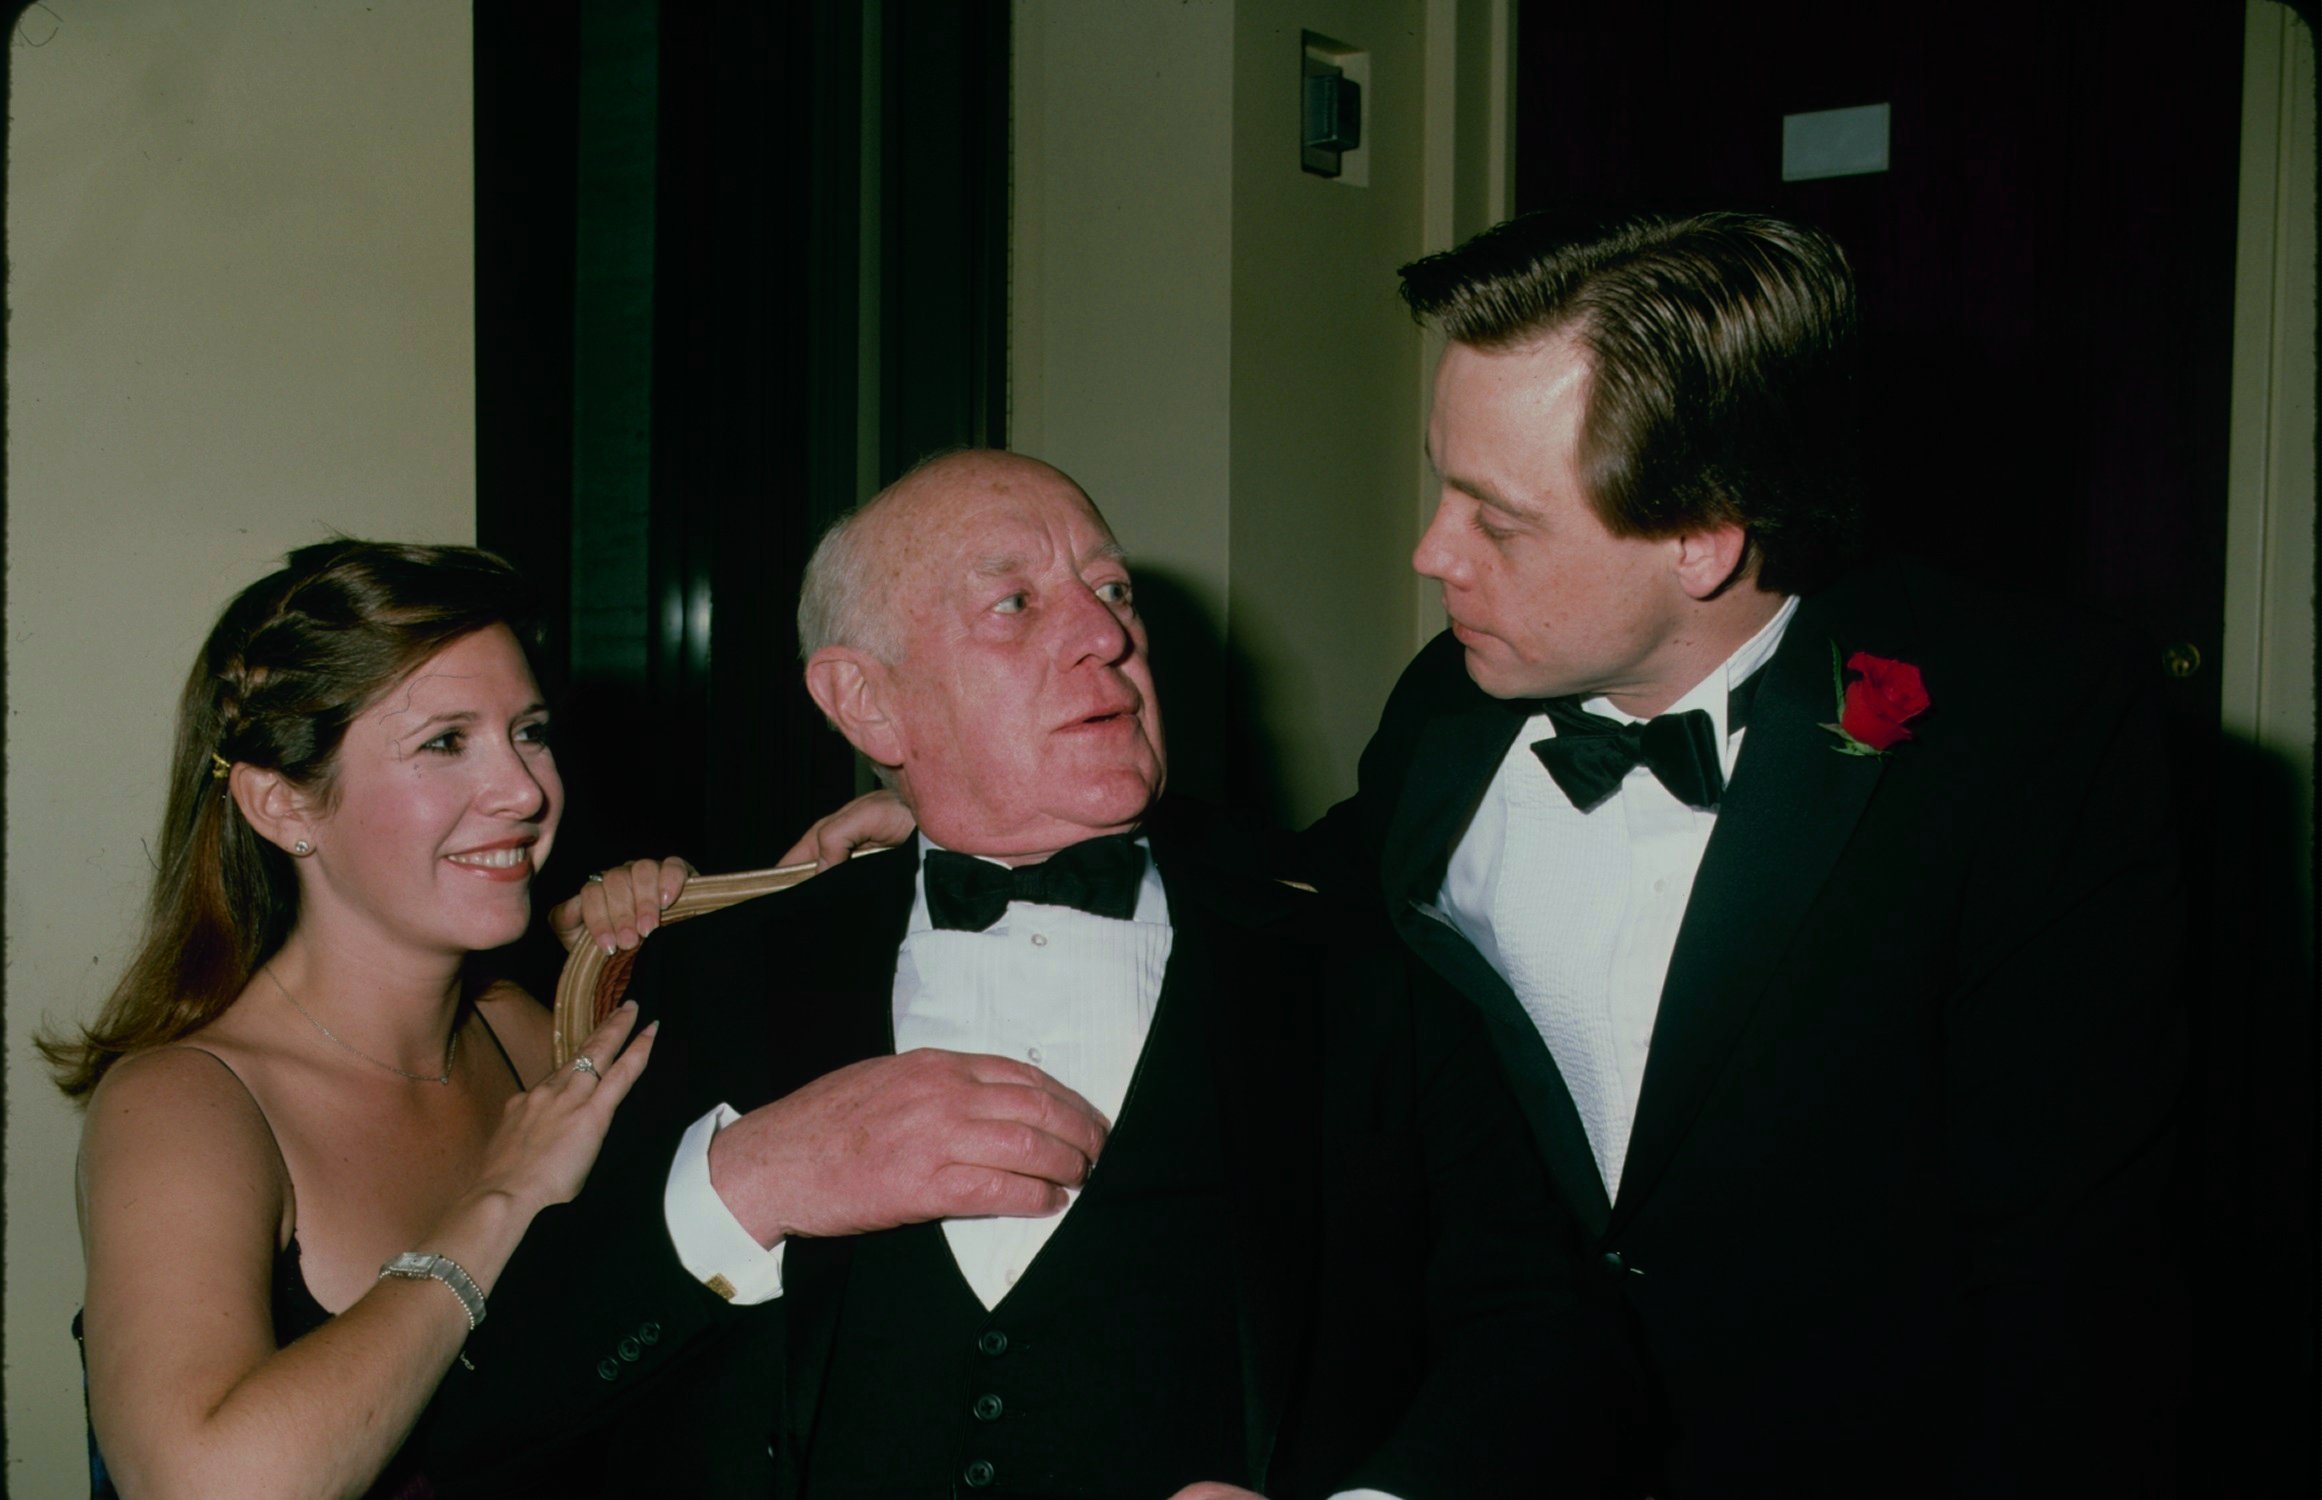 'Star Wars' actors Carrie Fisher, Alec Guinness, and Mark Hamill